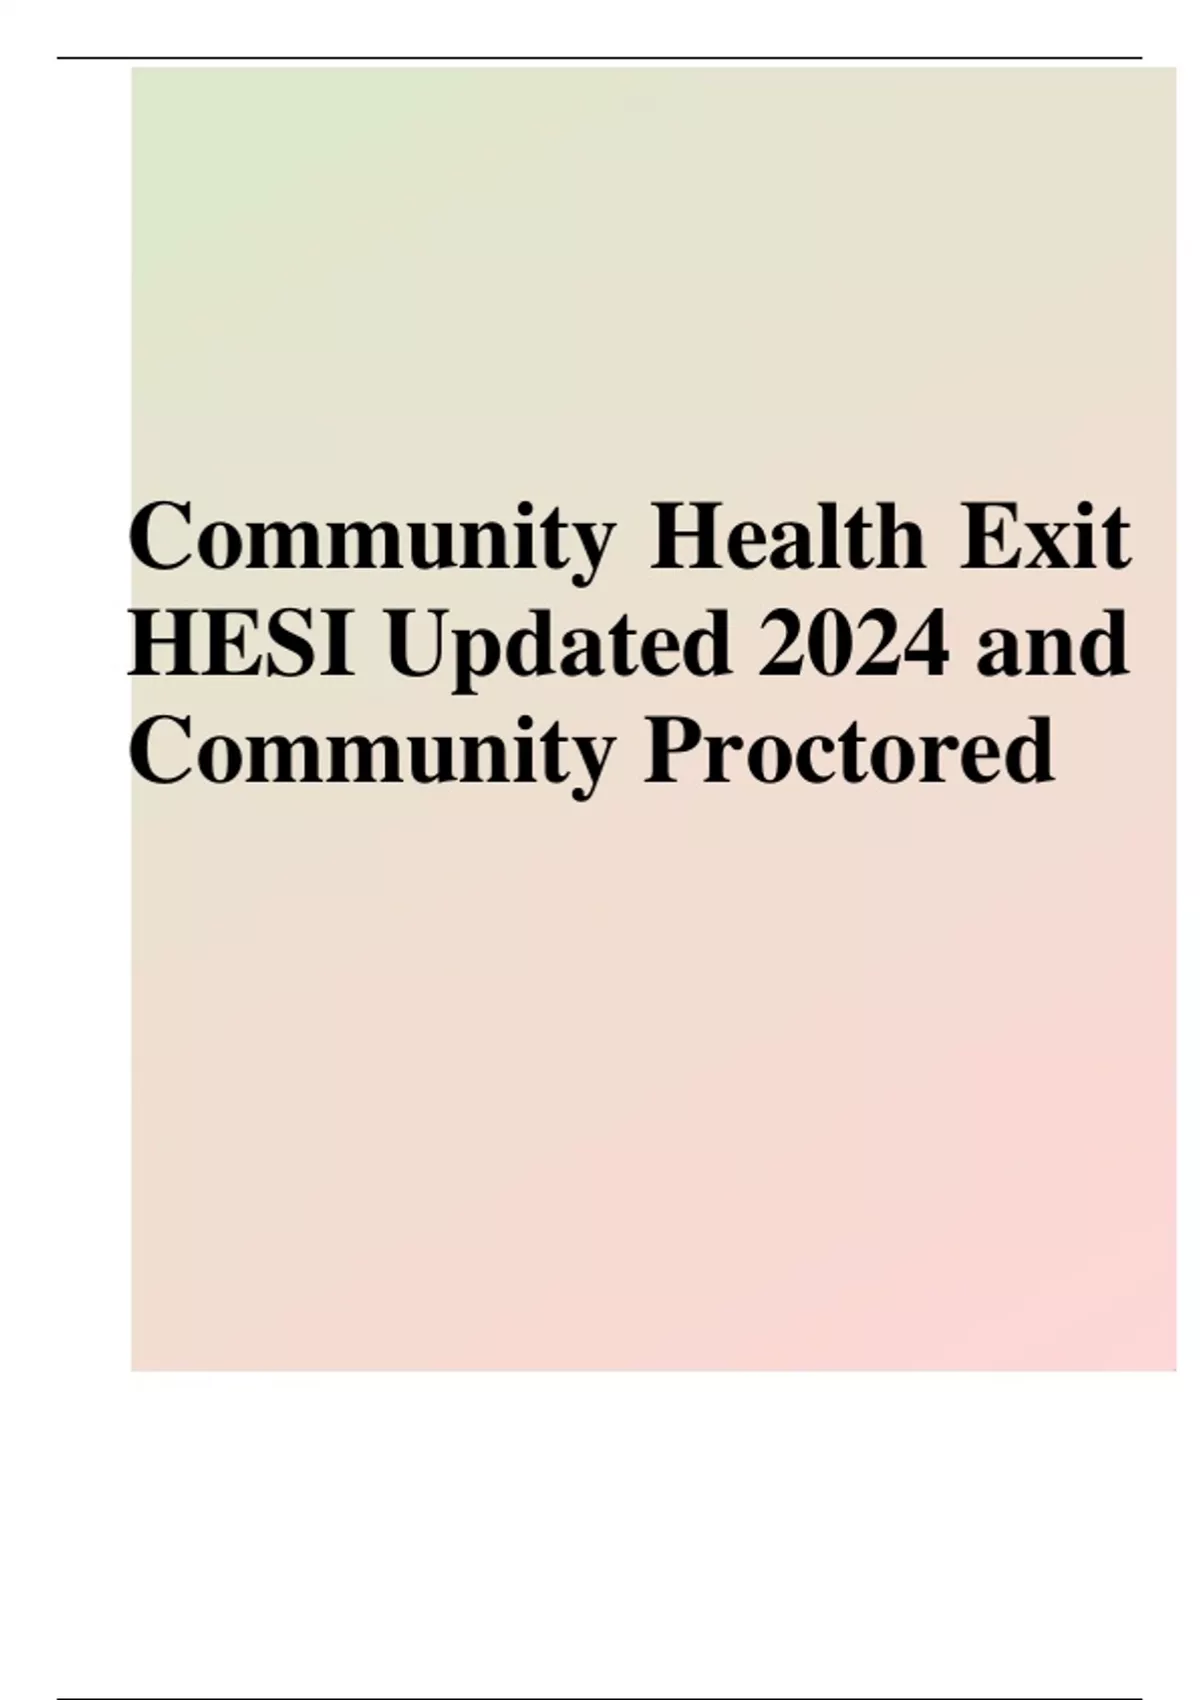 Community Health Exit HESI Updated 2024 and Community Proctored HESI